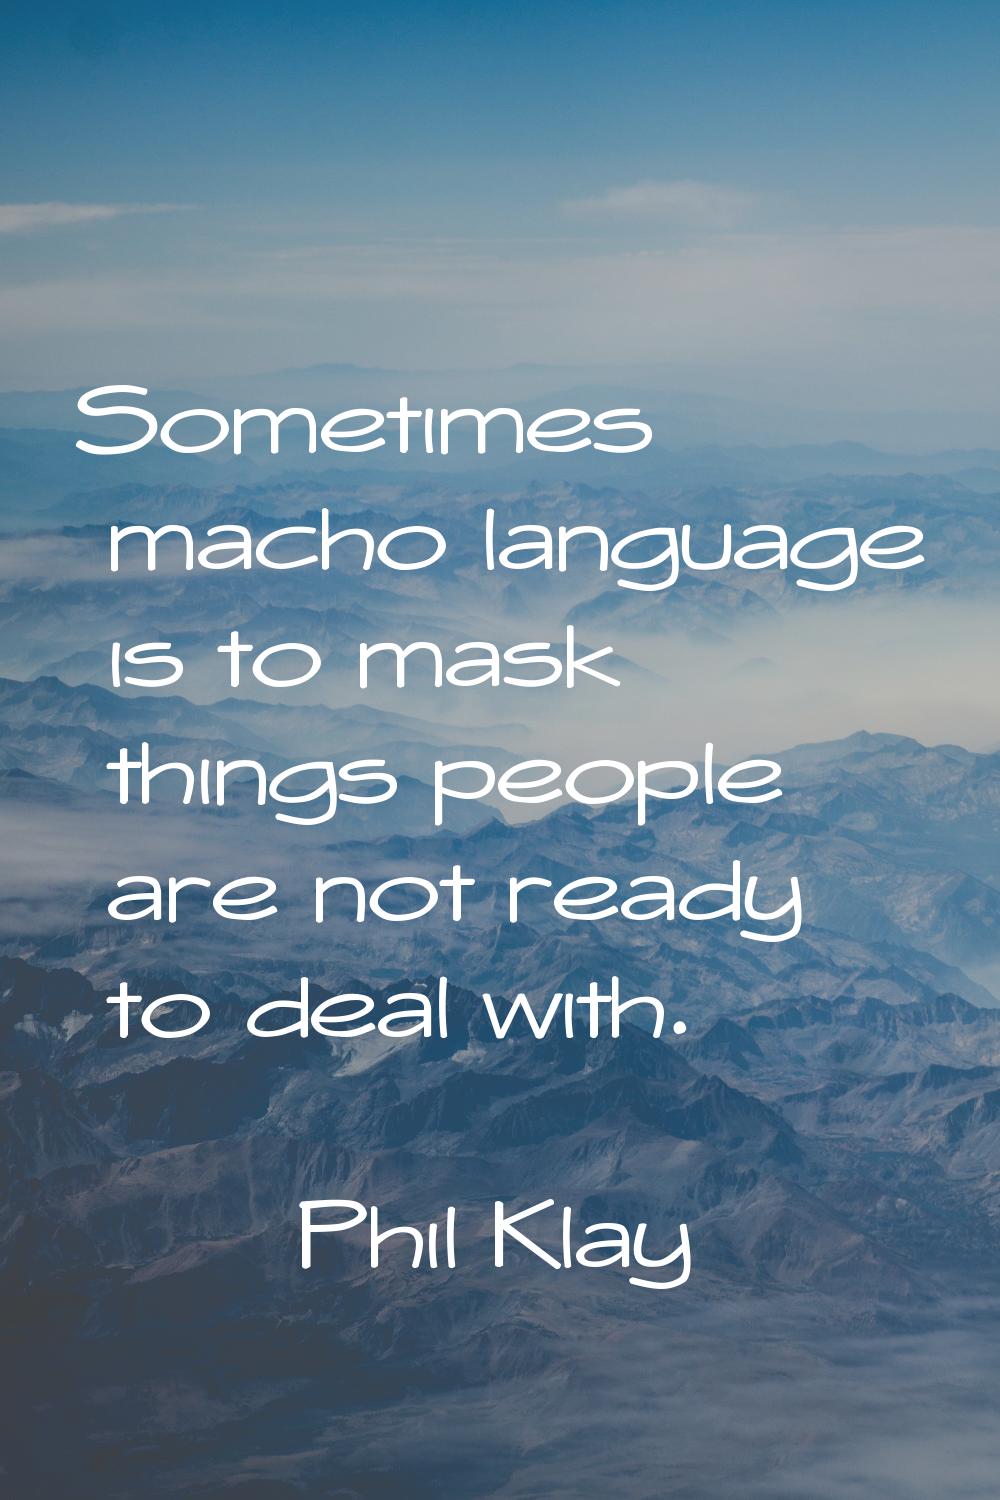 Sometimes macho language is to mask things people are not ready to deal with.